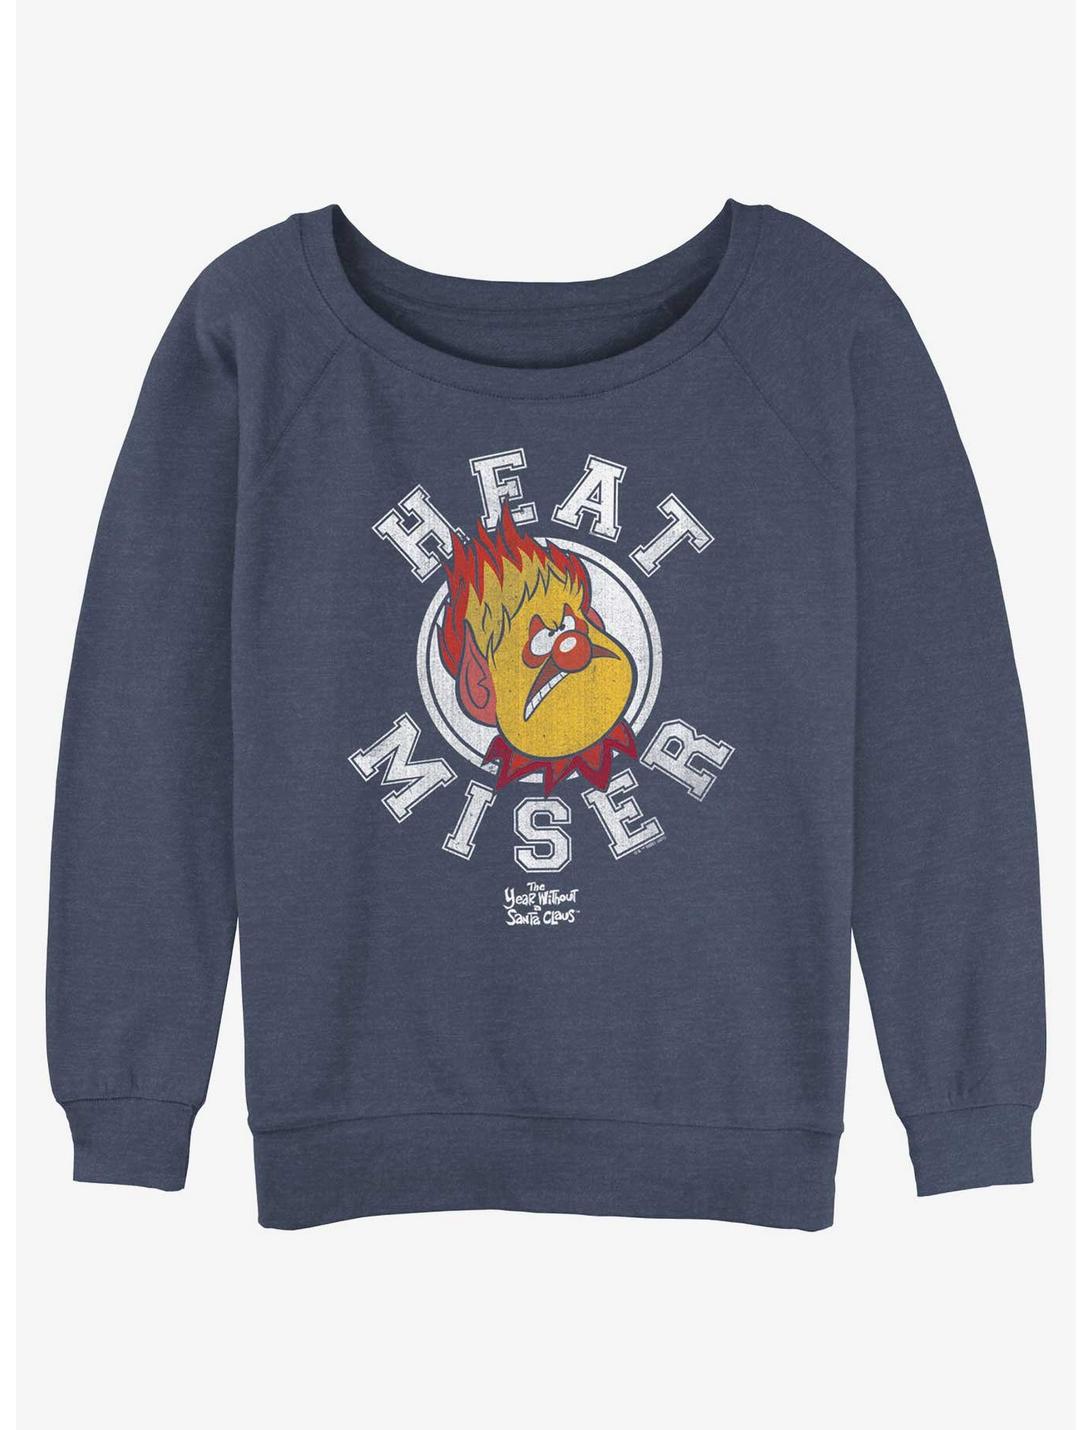 The Year Without a Santa Claus Heat Miser Collegiate Womens Slouchy Sweatshirt, BLUEHTR, hi-res